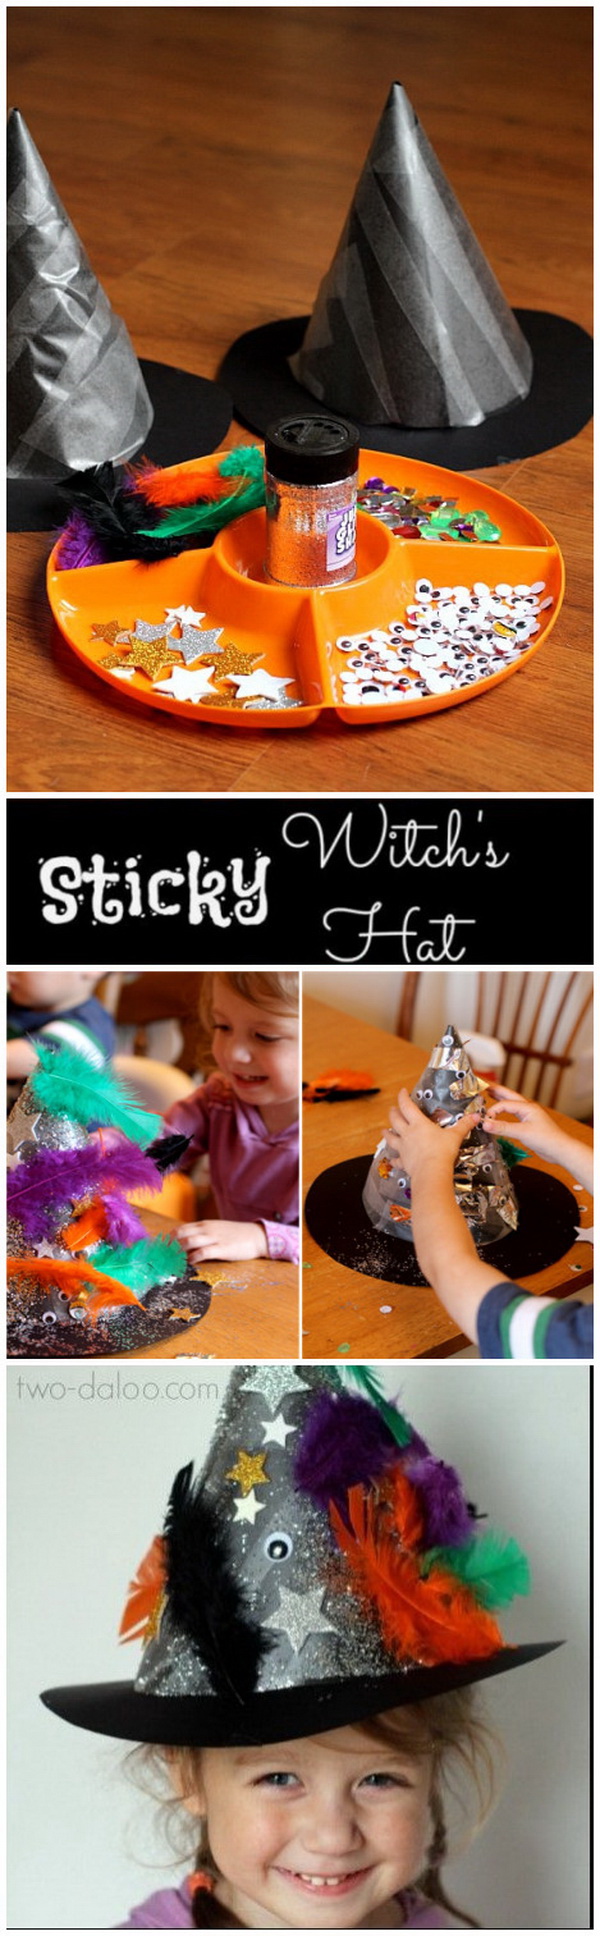 Sticky Witch Hat Toddler Craft. These sticky witch hats are made with contact paper, poster board, and collage materials! Kids big and small will have great fun in this craft! 